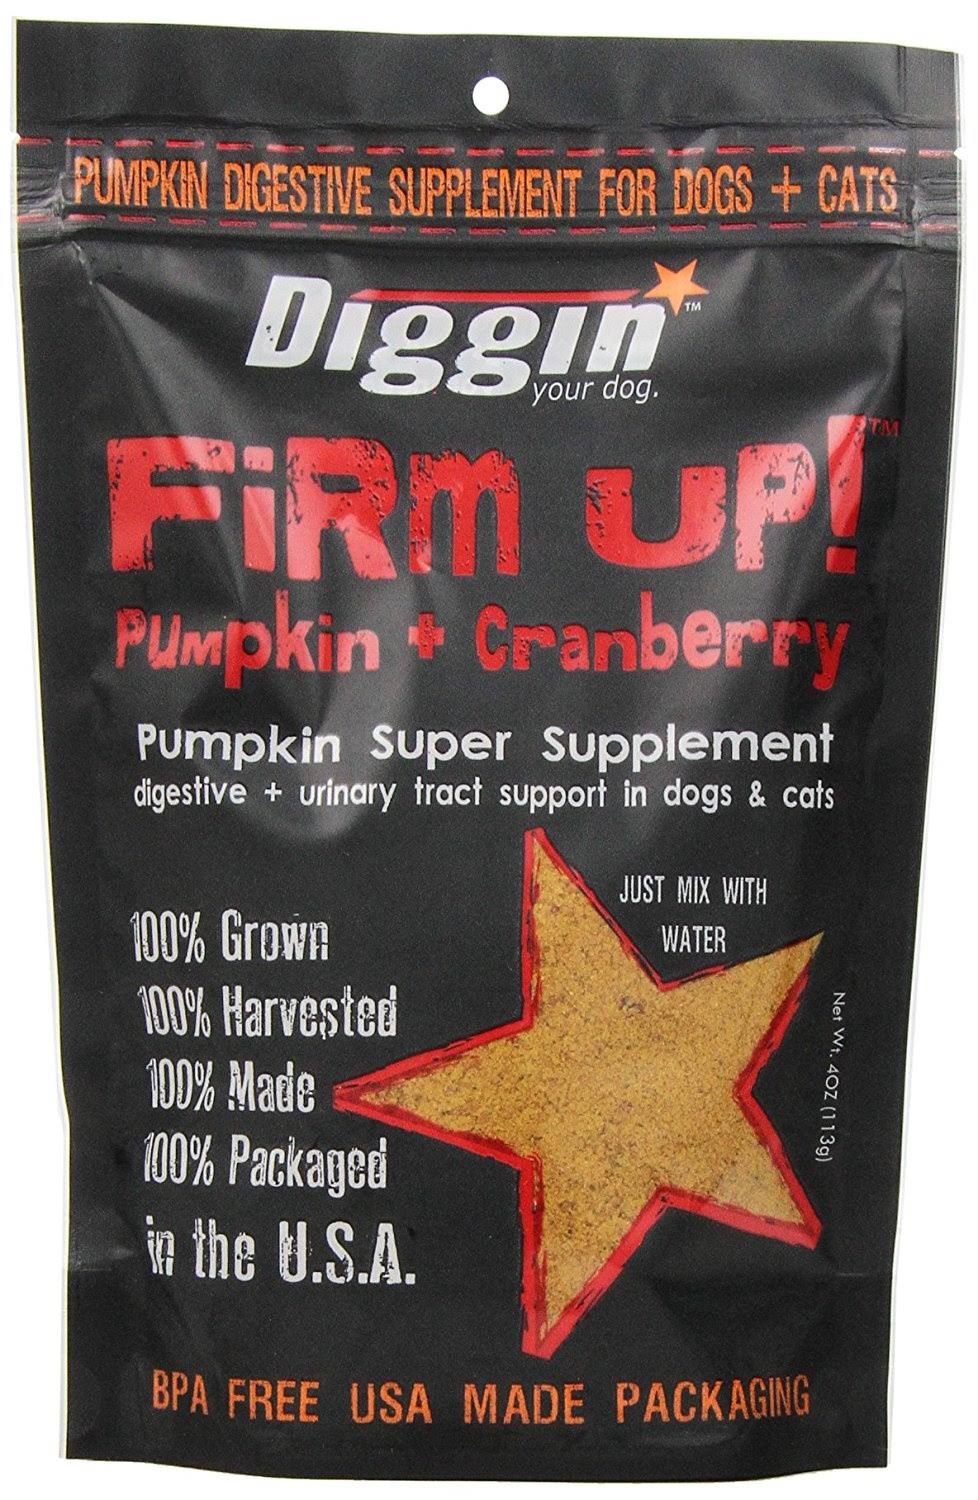 Firm Up! For Uninary Dog Tract Support - Pumpkin & Cranberry